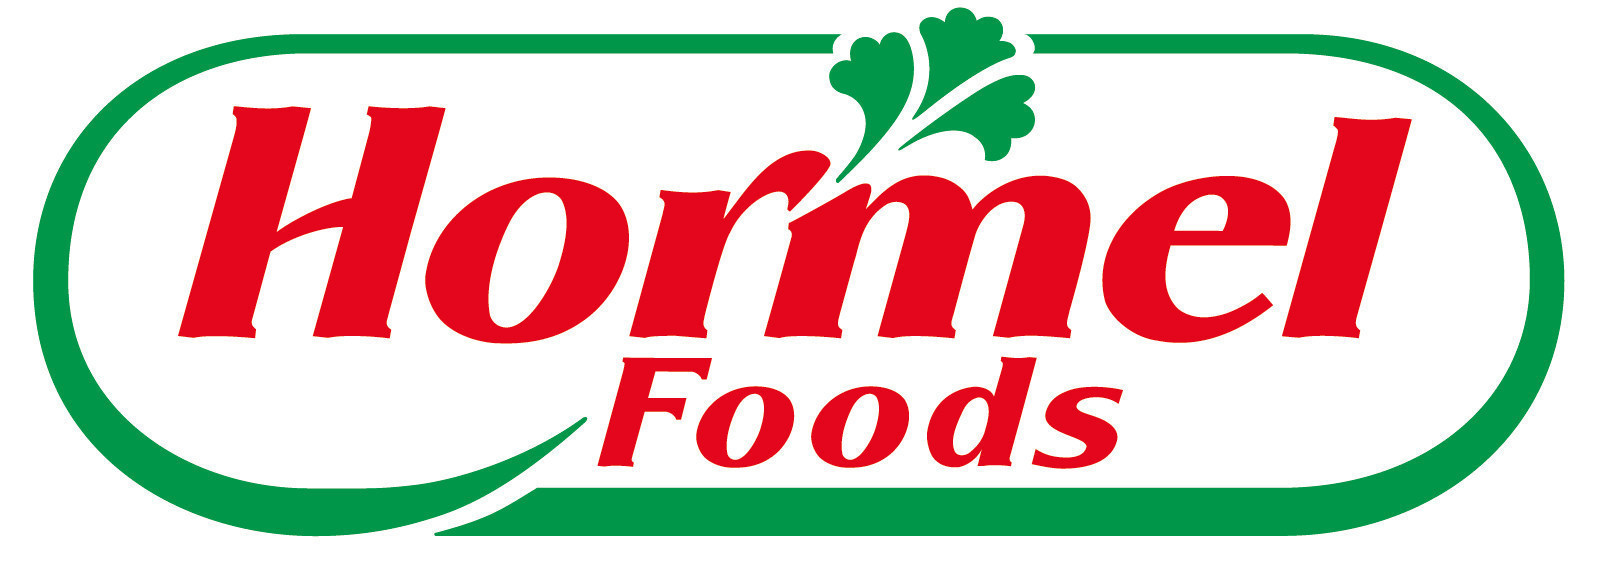 Hormel Foods Provides Food for Hurricane Ian Relief Efforts